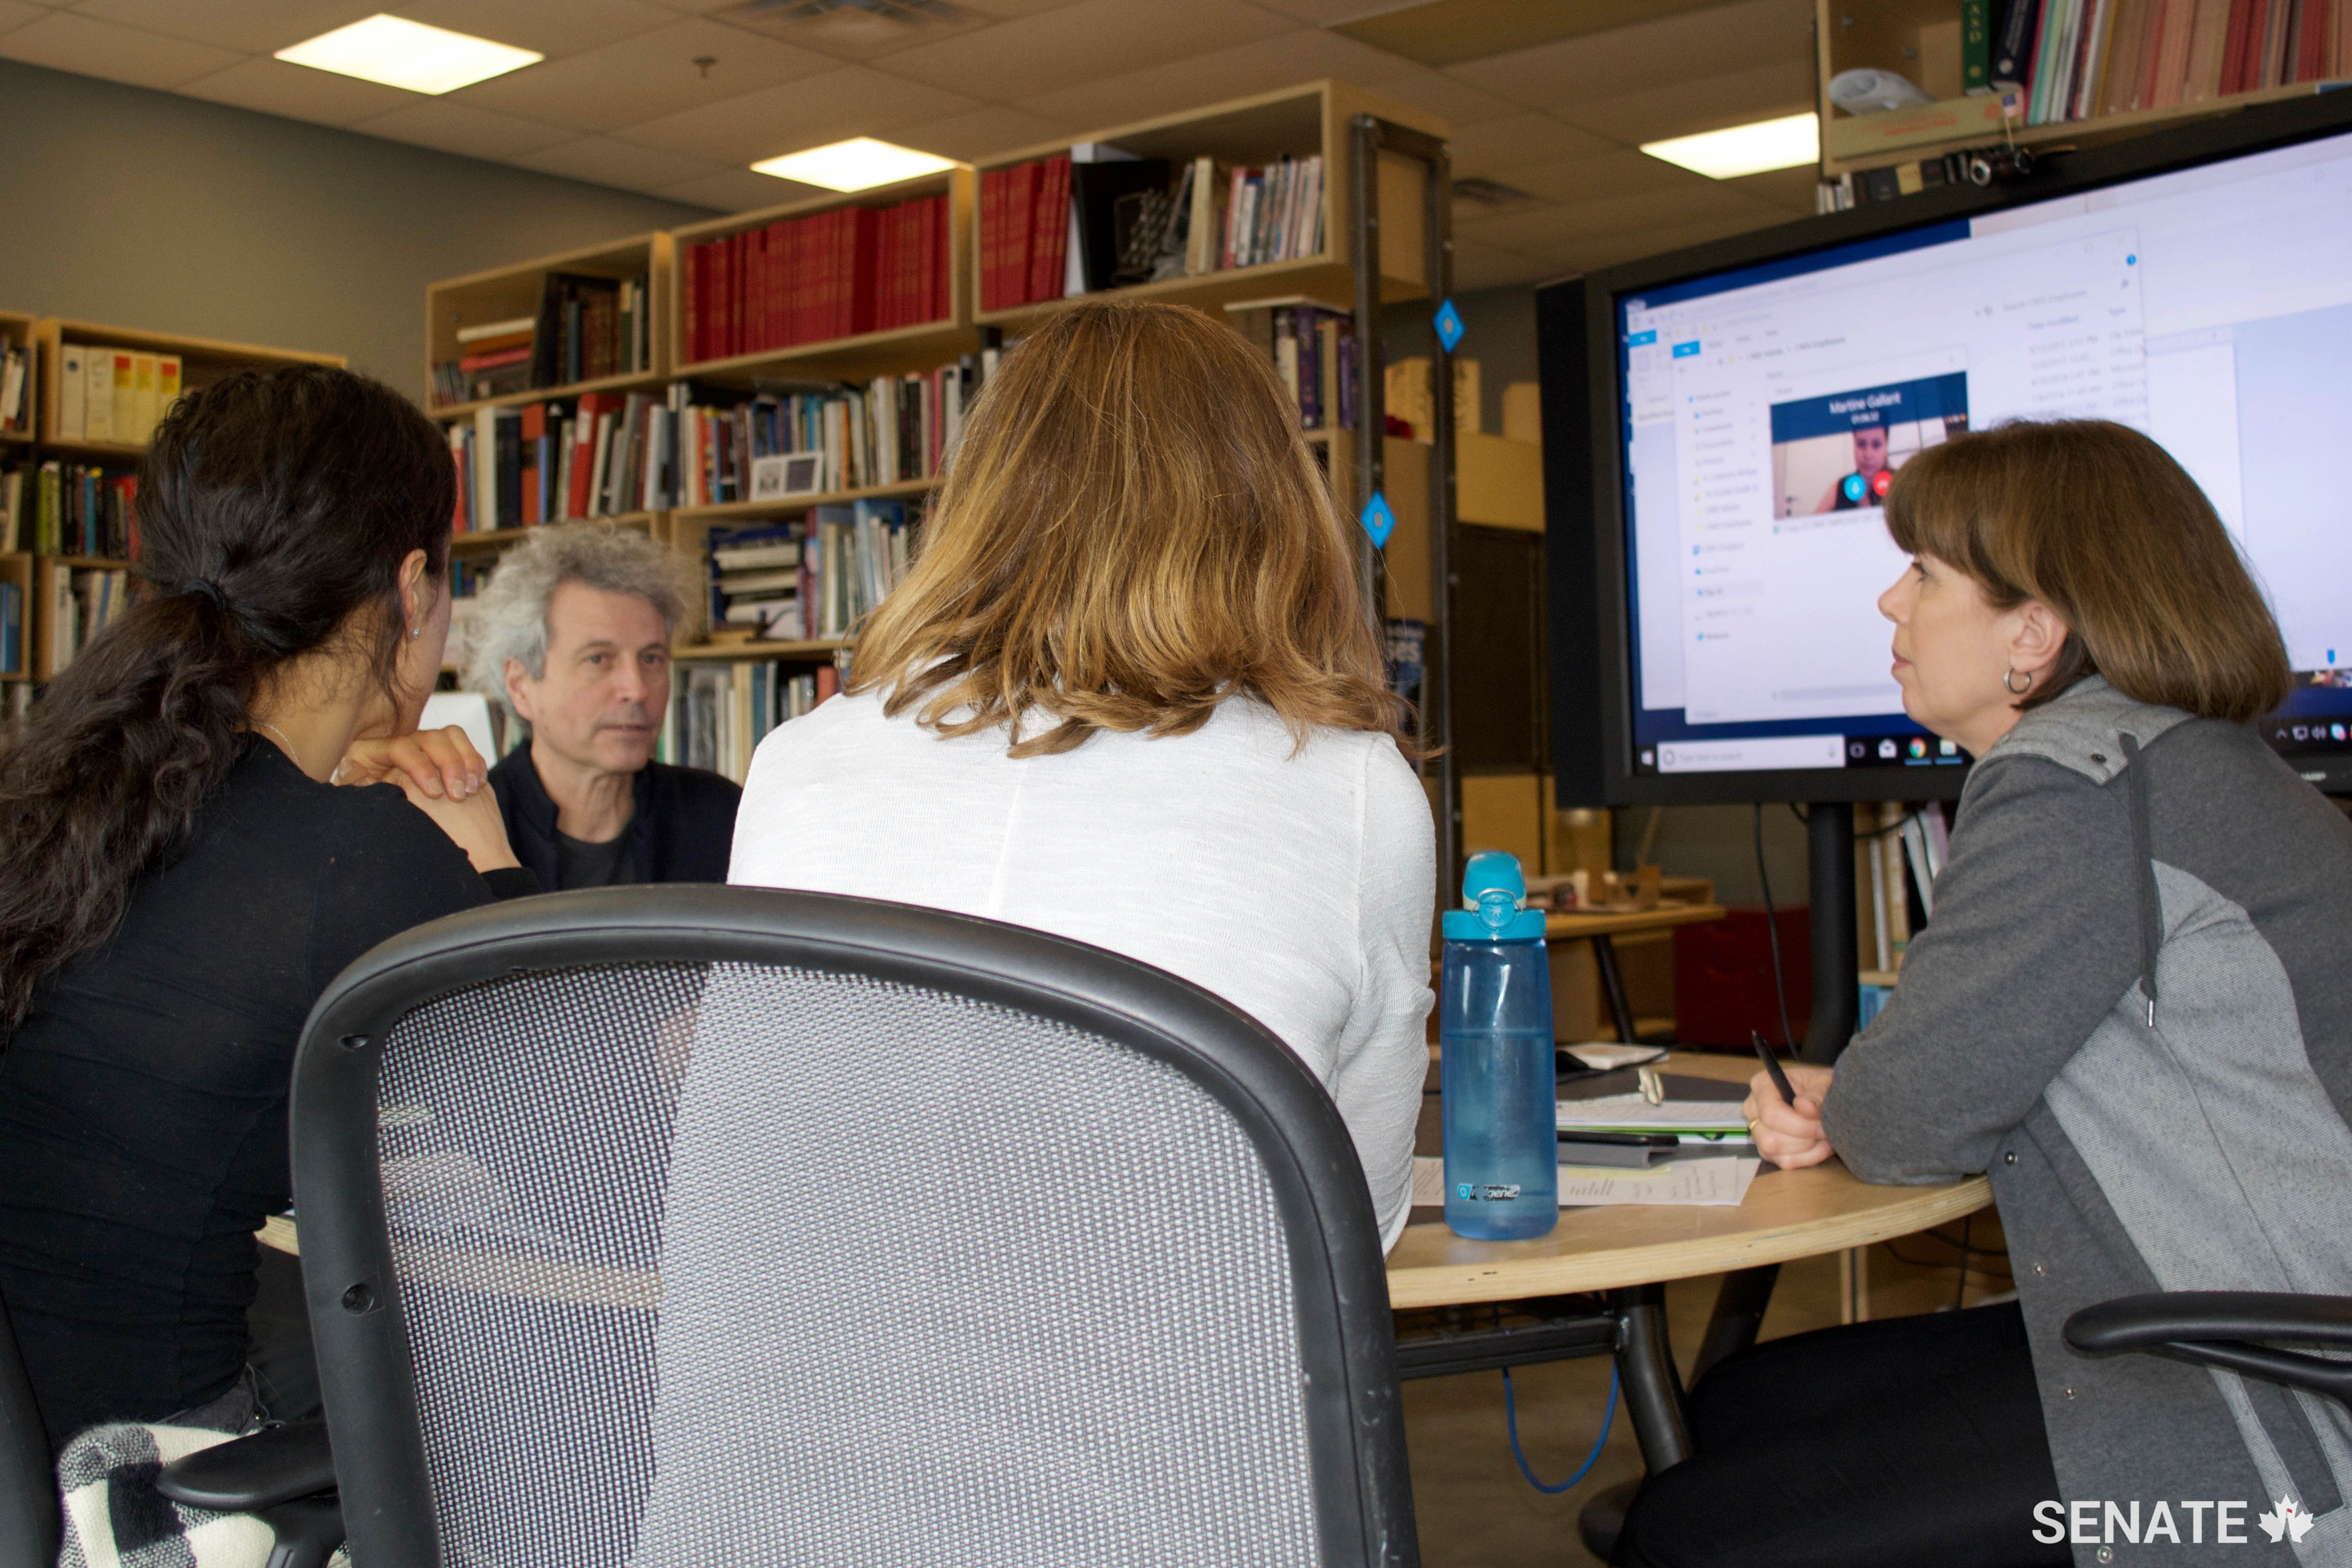 CIMS Director Stephen Fai (second from left) consults with his team, including (from left) Lara Chow, Katie Graham and operations manager Laurie Smith (right), about upcoming projects.